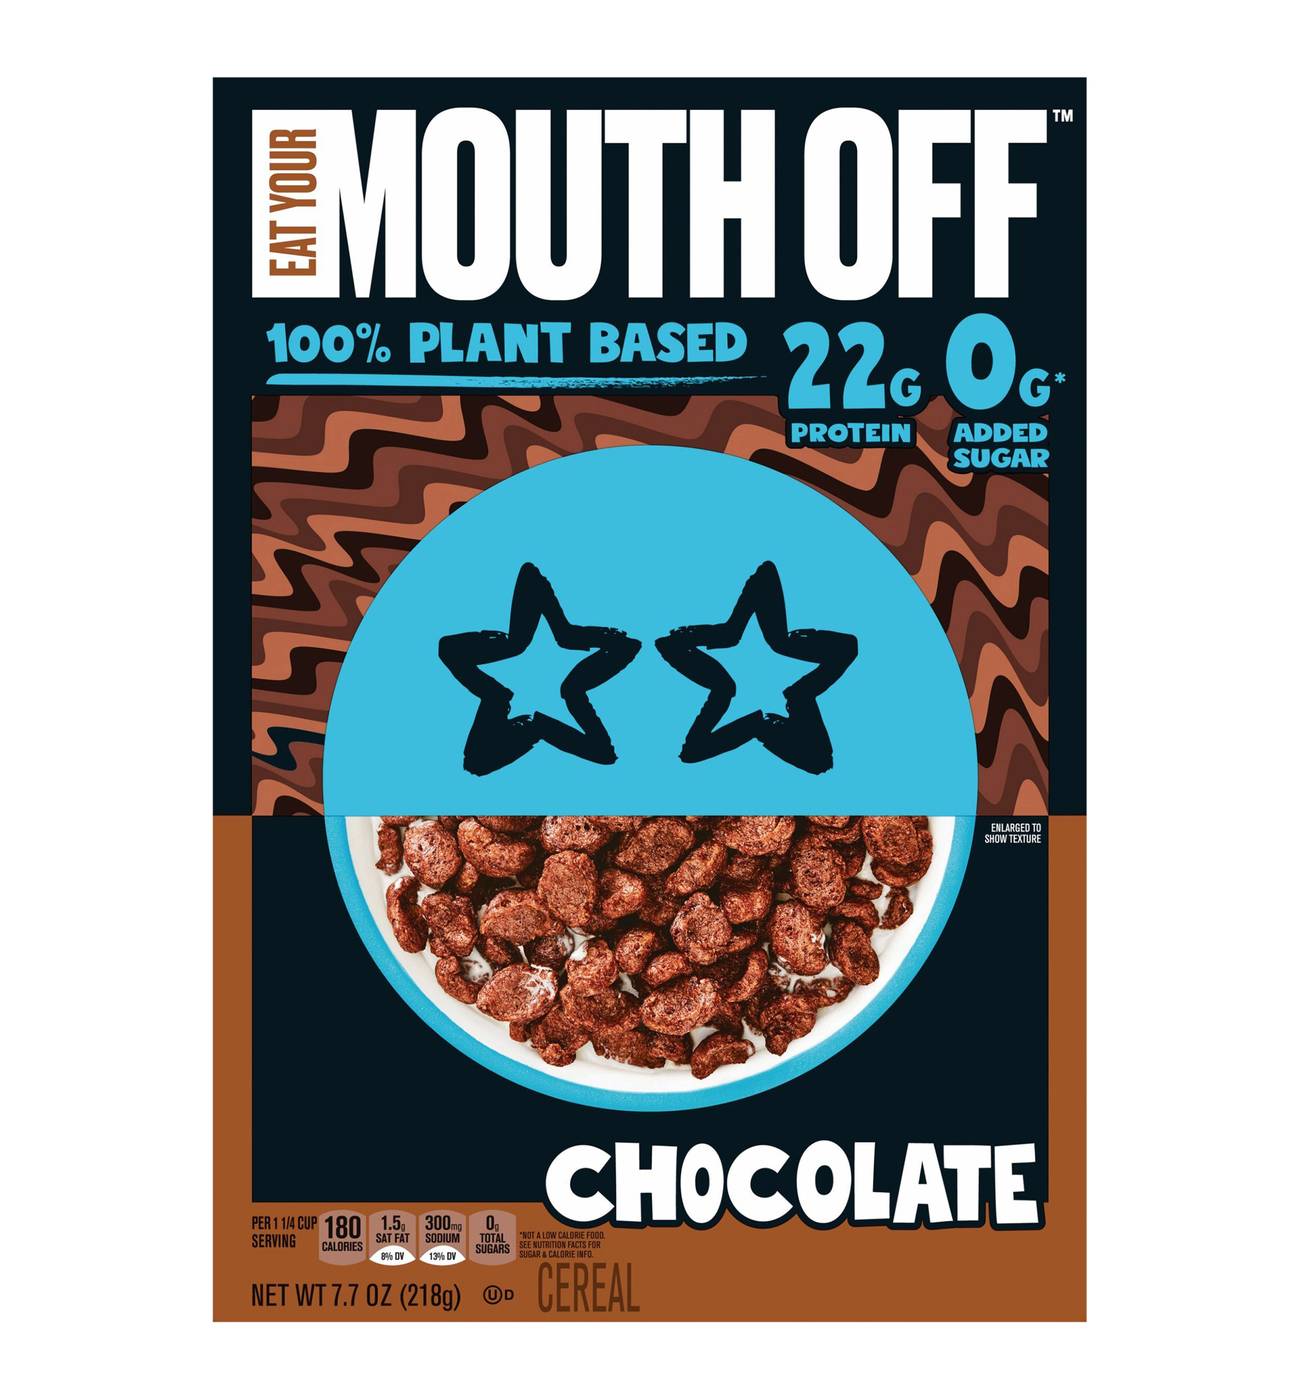 Kellogg's Eat Your Mouth Off Chocolate Plant Based Cereal; image 1 of 5